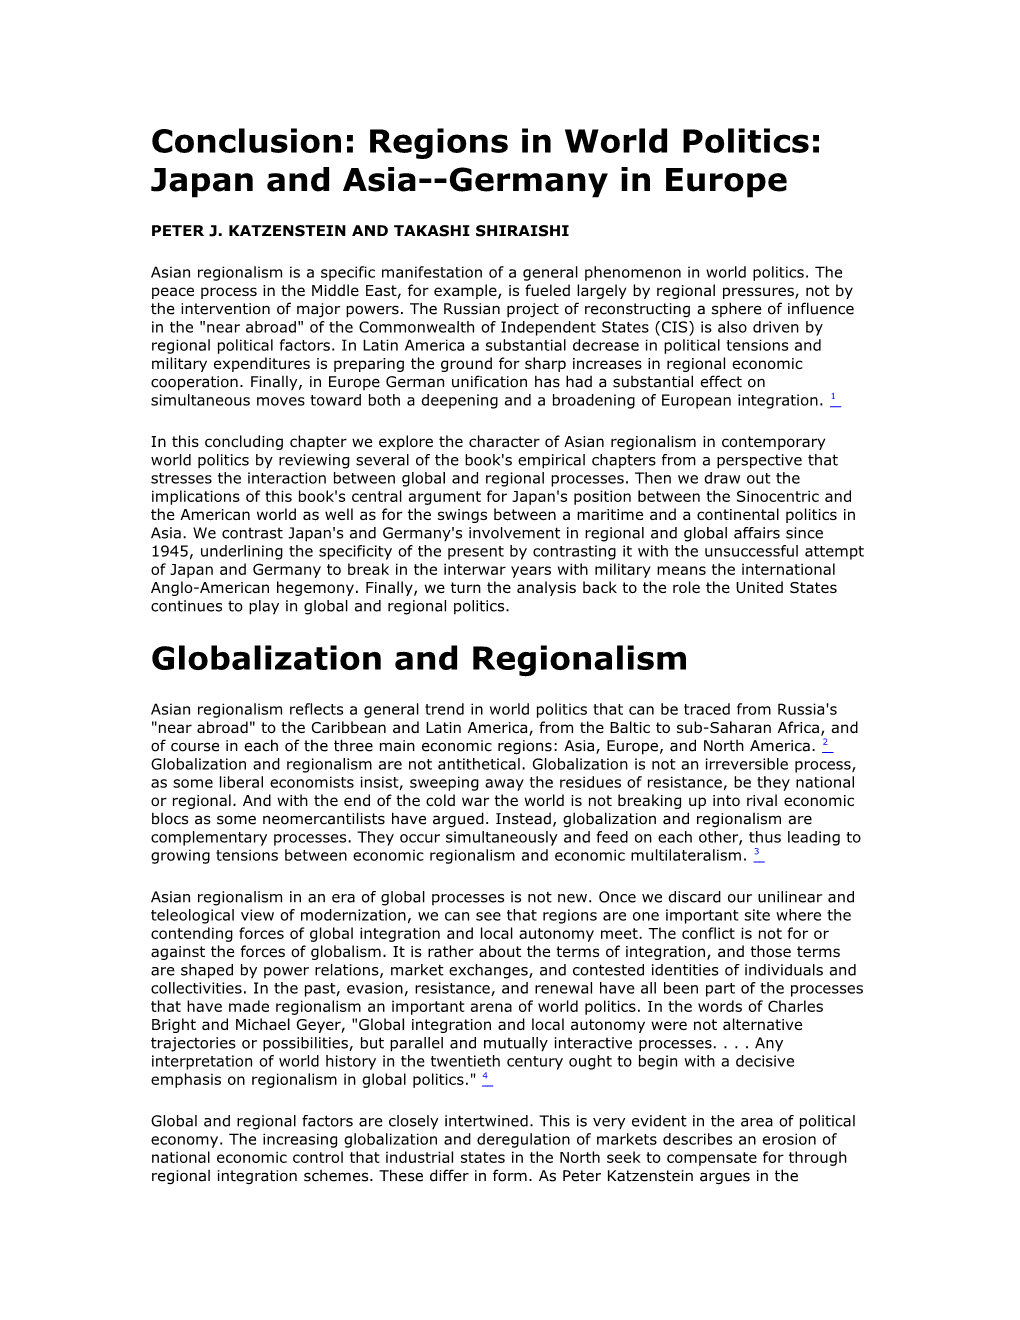 Conclusion: Regions in World Politics: Japan and Asia Germany in Europe